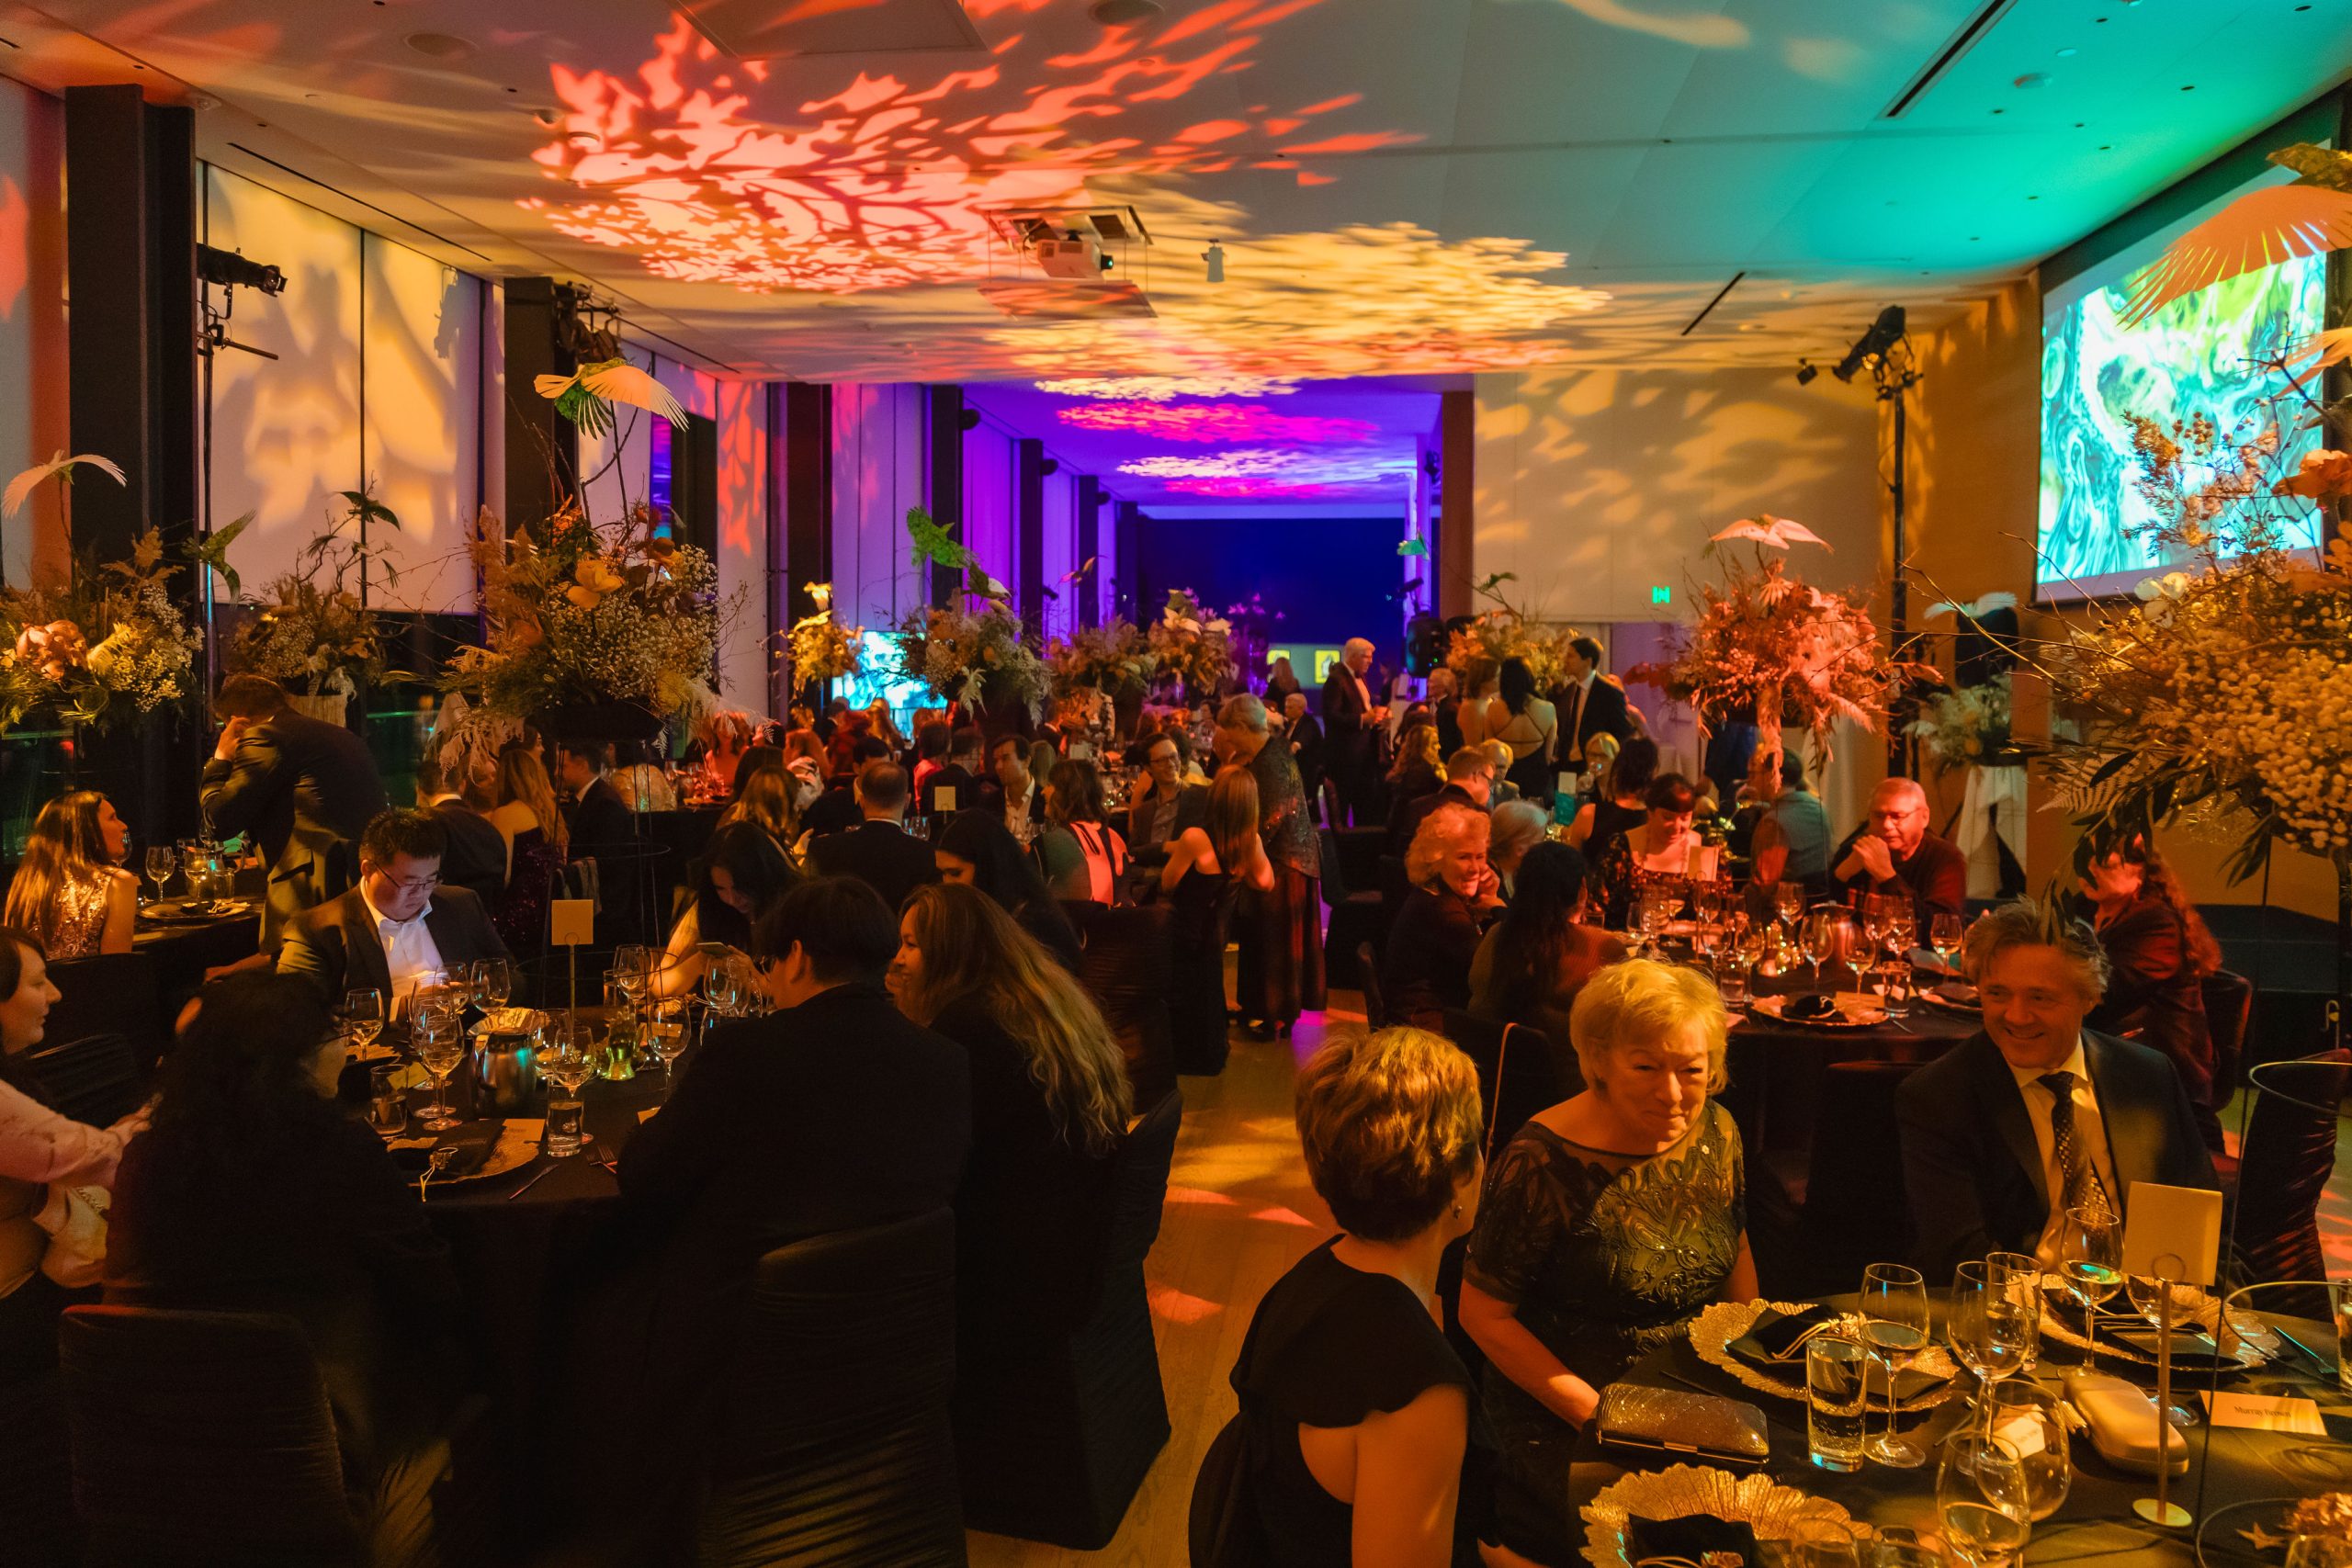 Guests dine together at Remai Modern's galaMODERN fundraiser. The room is filled with vibrant lighting and decor.